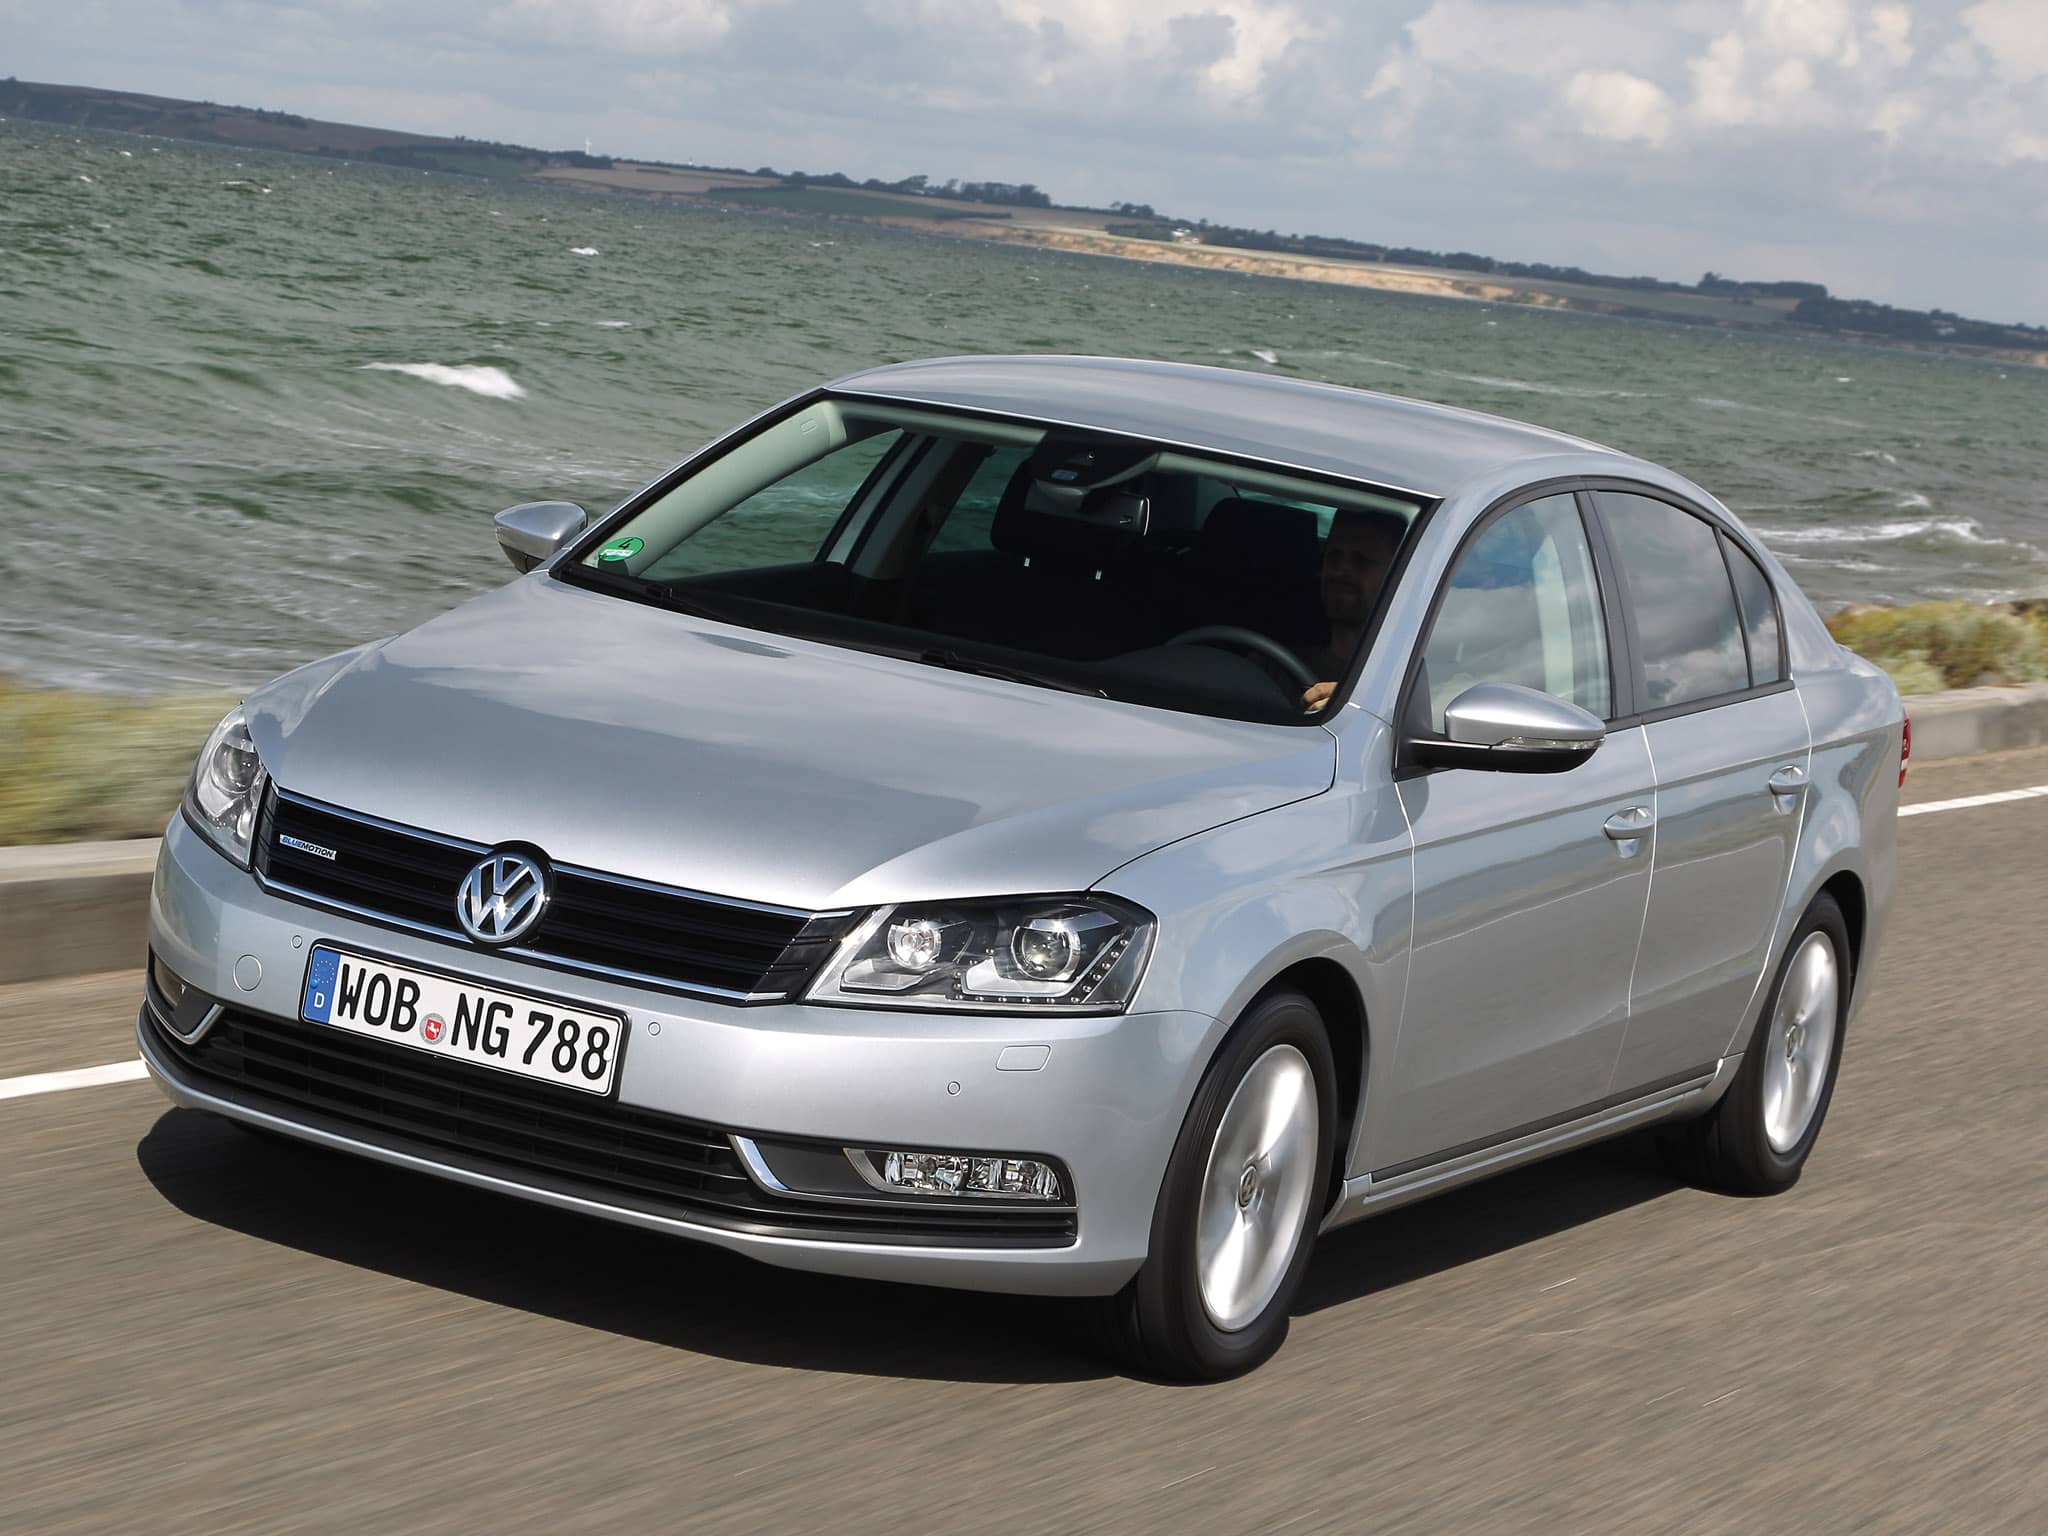 Volkswagen Passat shuttle USed to describe our top 10 cars for taxi service blog